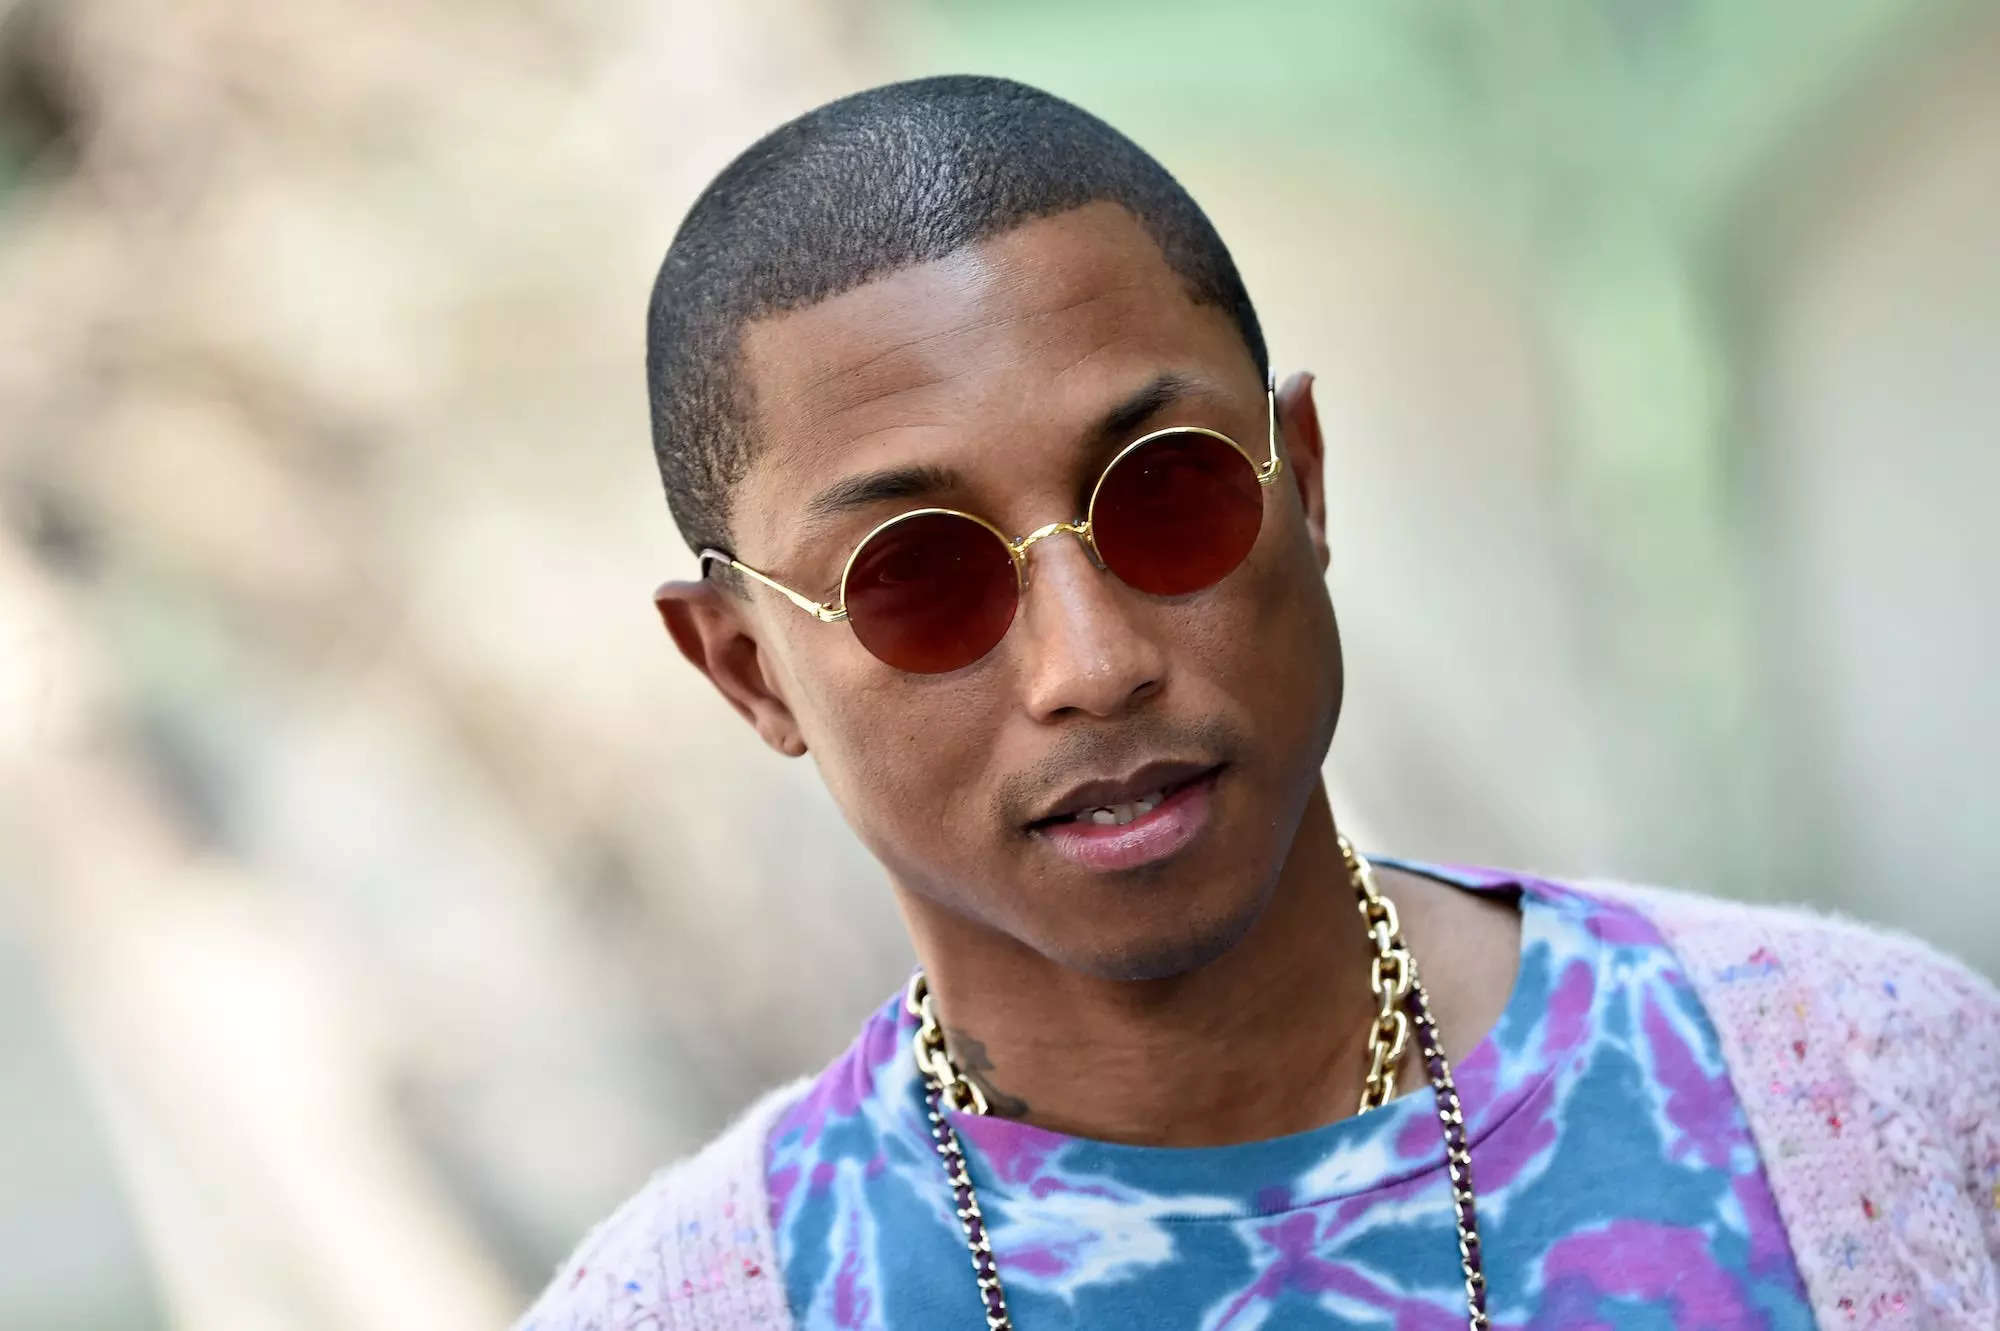 Pharrell Williams just turned 50 years old. Here are 10 hit songs you may  not know he wrote or produced.